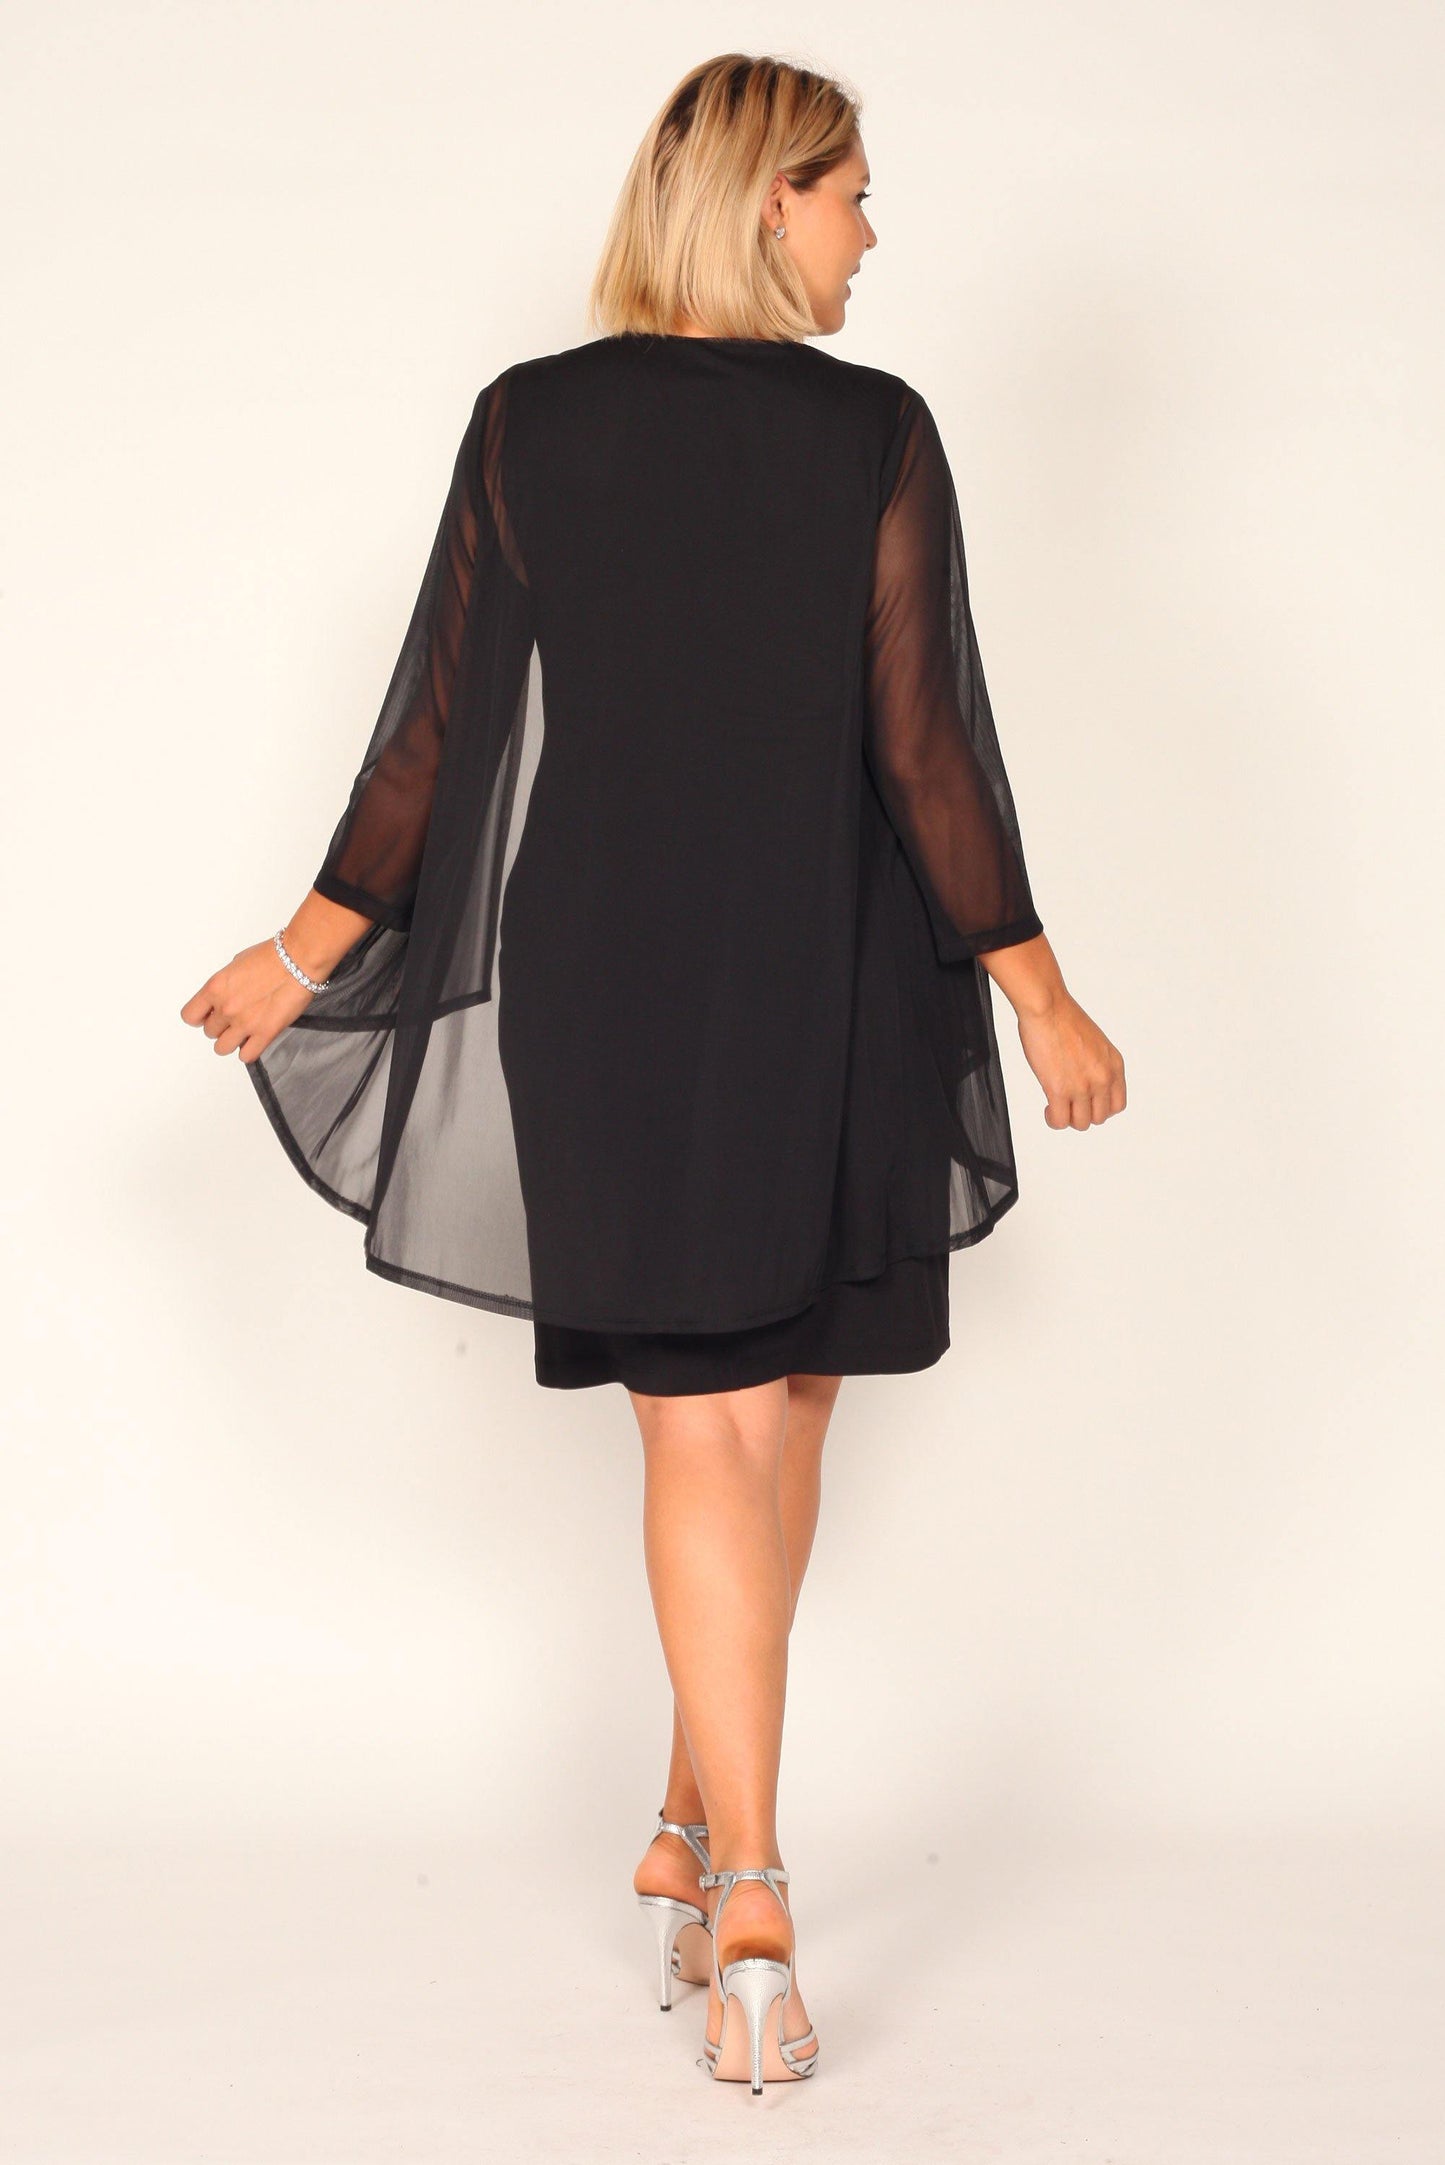 Connected Apparel Short Mother of the Bride Dress - The Dress Outlet